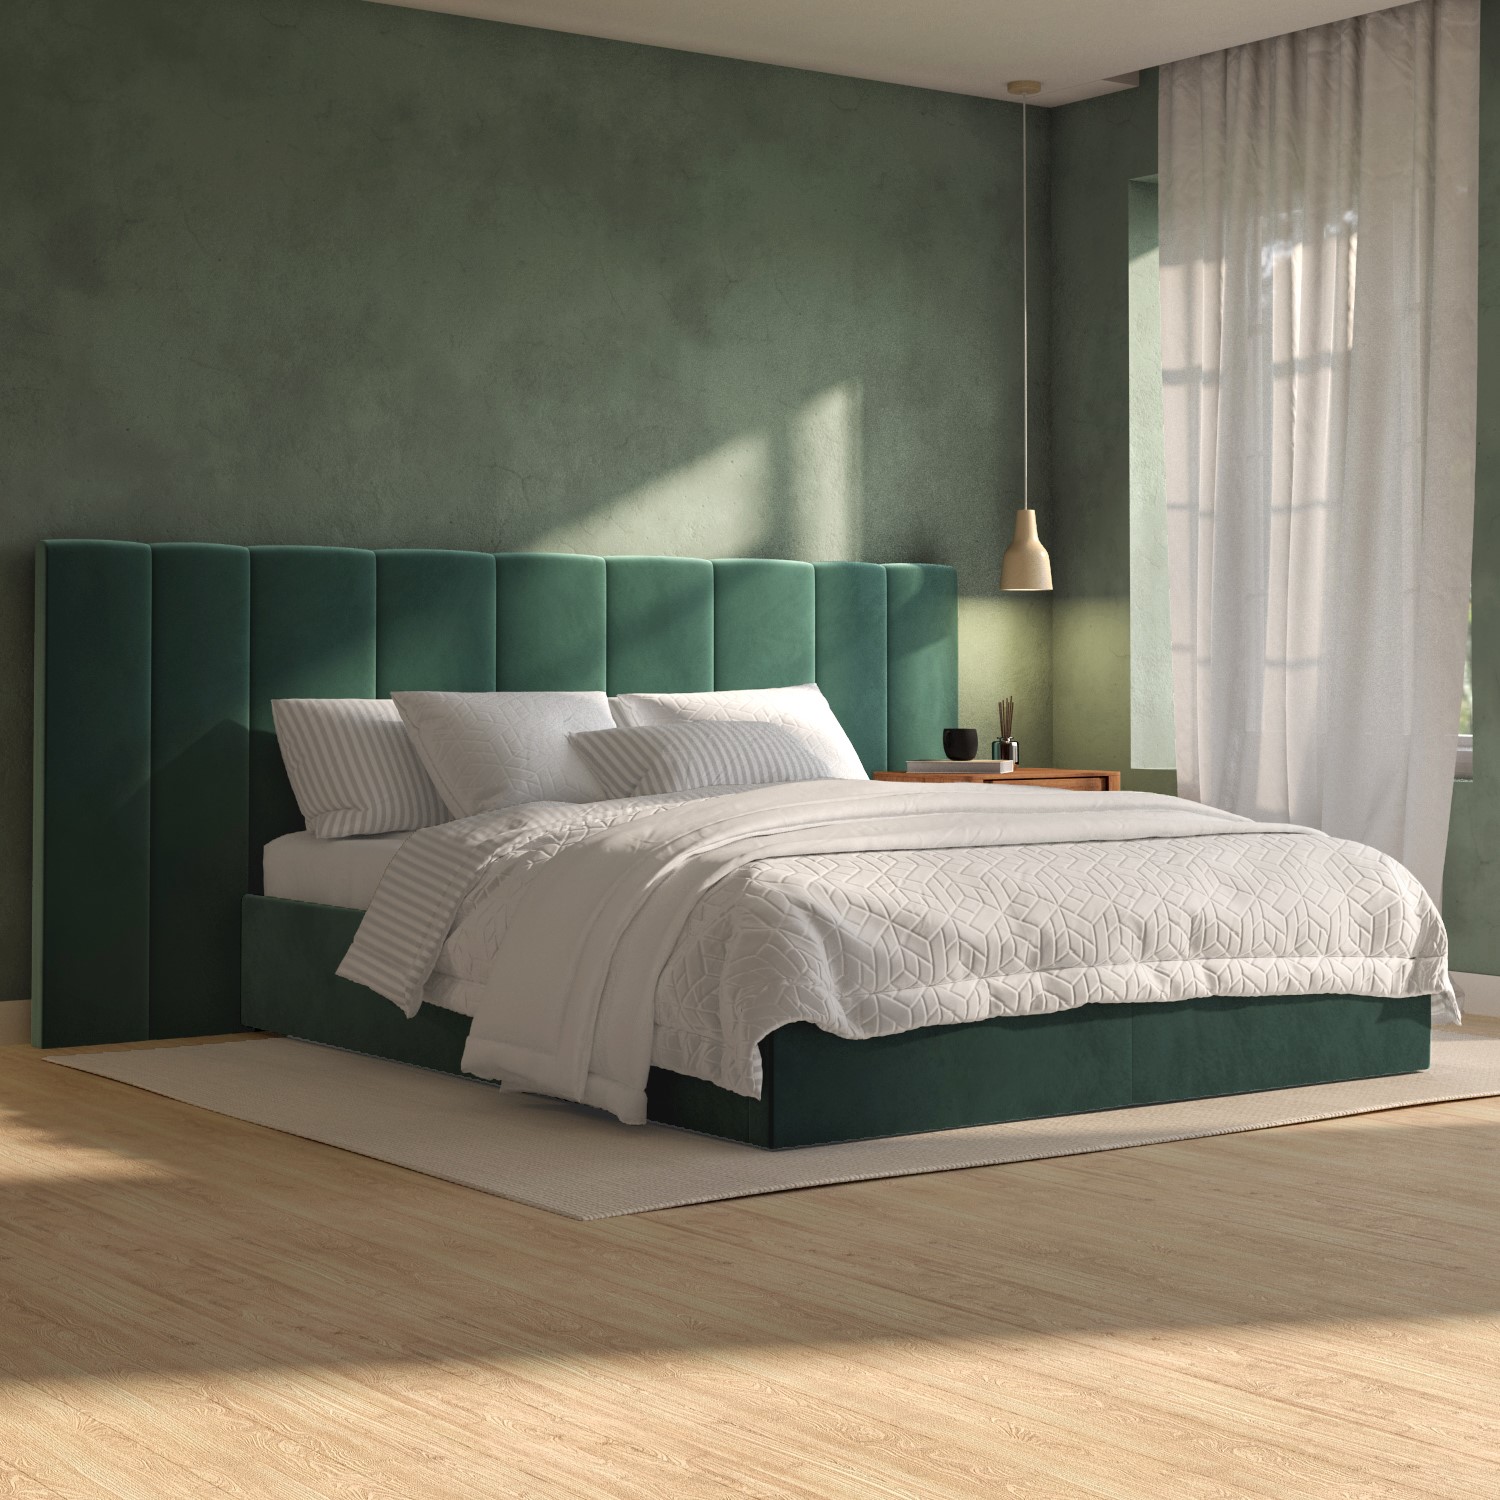 Read more about Green velvet king size ottoman bed with wide headboard iman